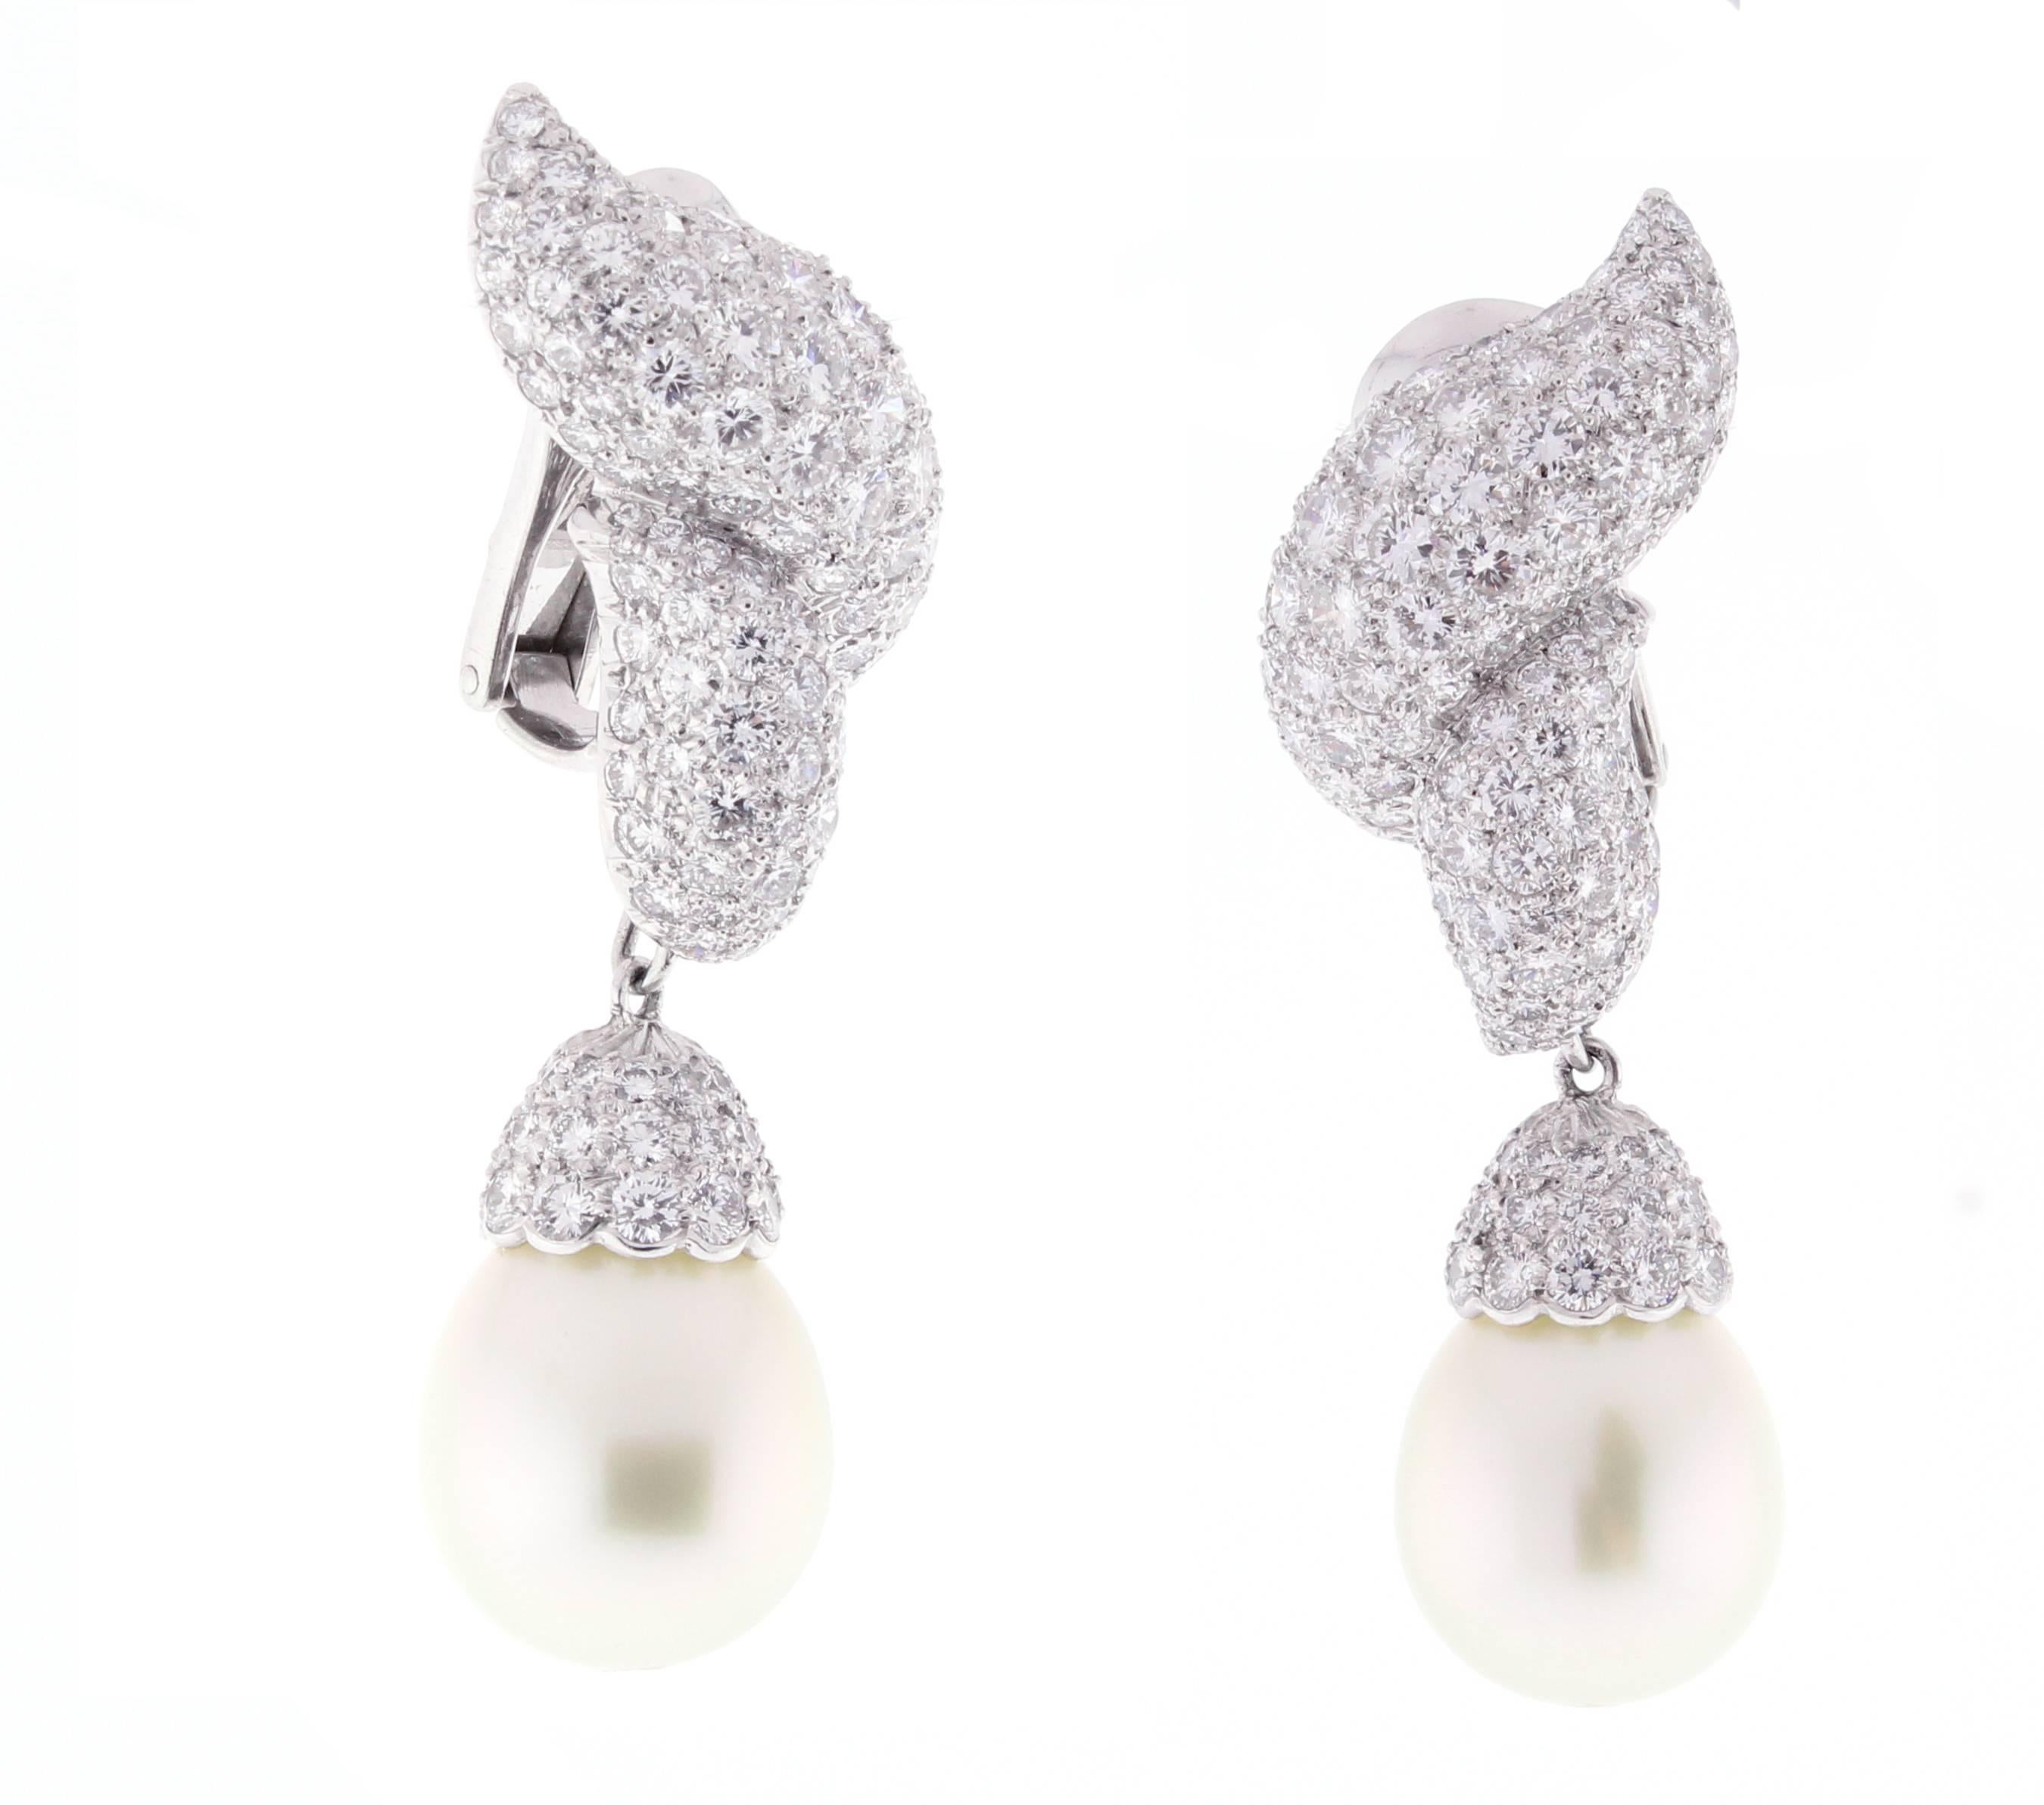 A dramatic pearl drop earring featuring 14 X13mm and 7 ¾ carats of shimmering brilliant diamonds, set in platinum. The earring boast  184 brilliant diamonds weighing approximately  6 carats. The drops are comprised of 66 diamonds weighing 1.74 carats